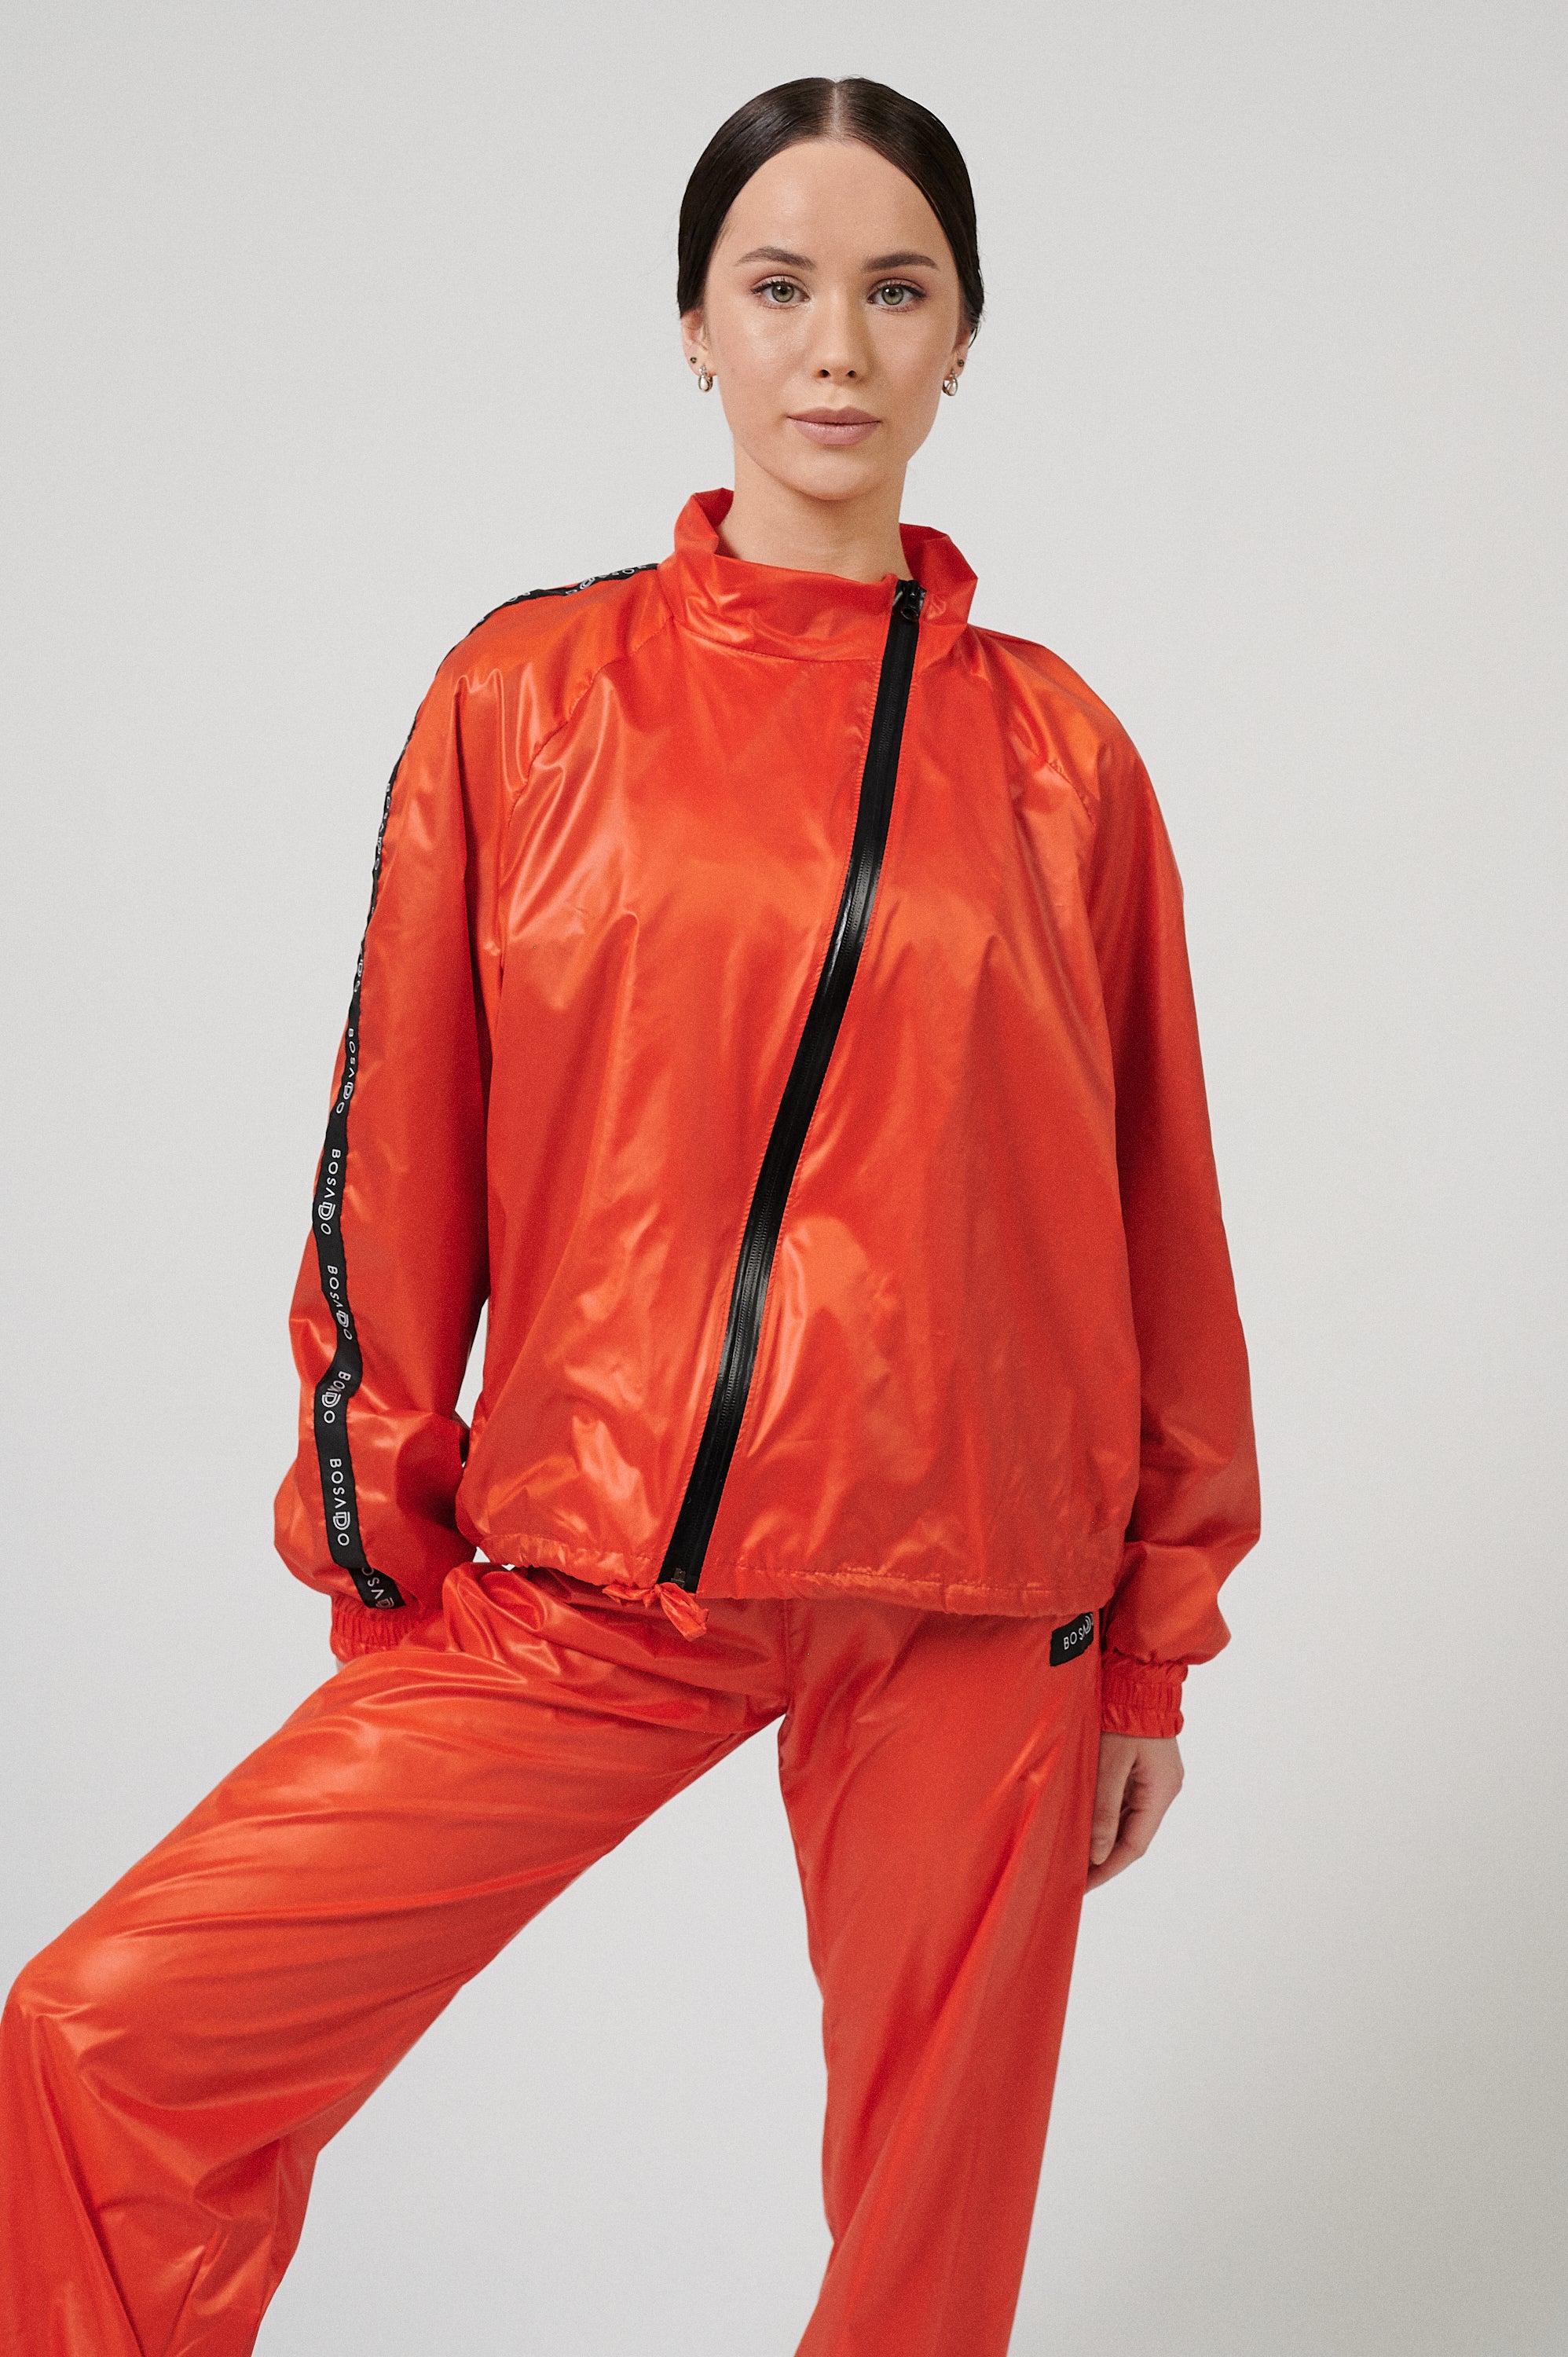 FUTURE GISELLE COLLECTION 24 | Futuristic red sports suit with pants + shorts